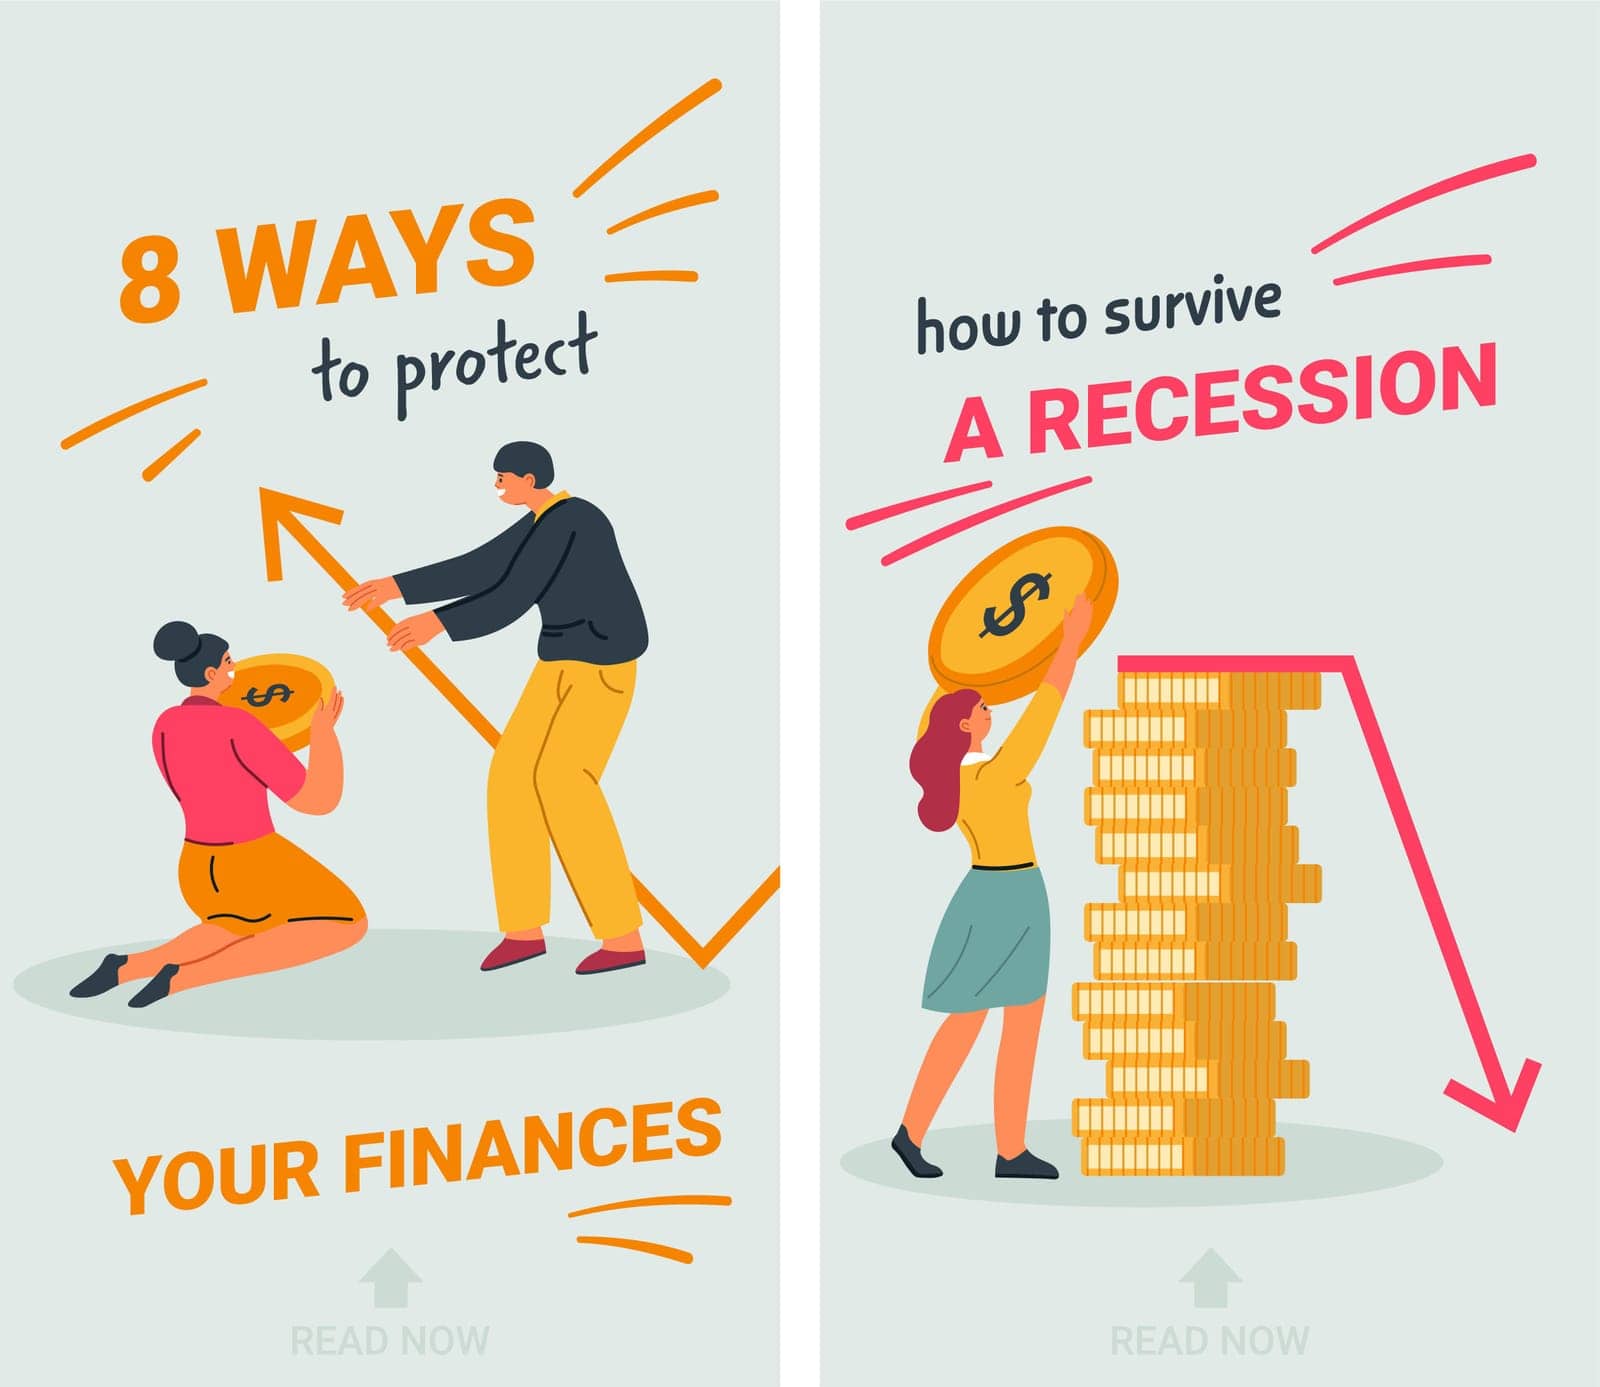 How to survive recession, 8 ways to protect money by Sonulkaster